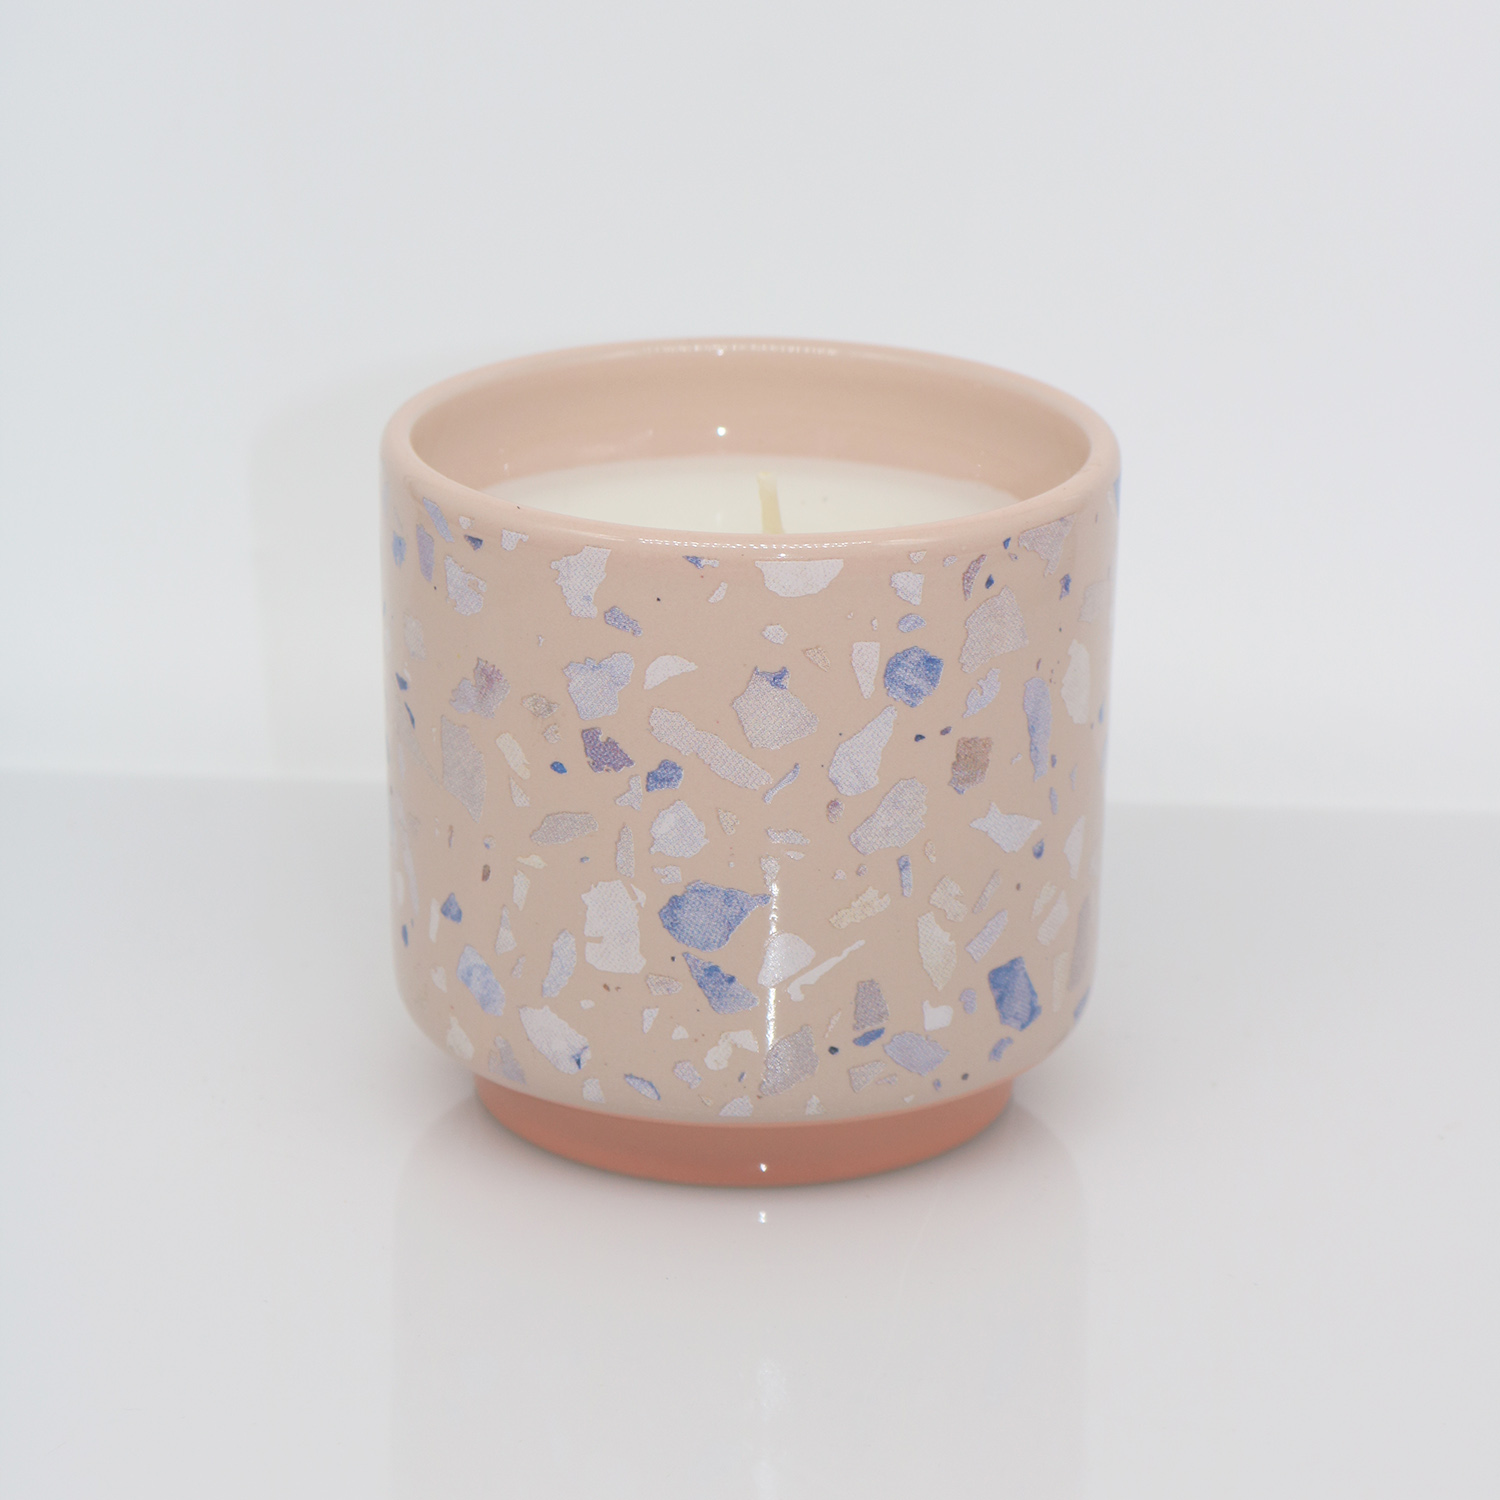 High Quality Ceramic Candle with Popular Fragrance for Gift